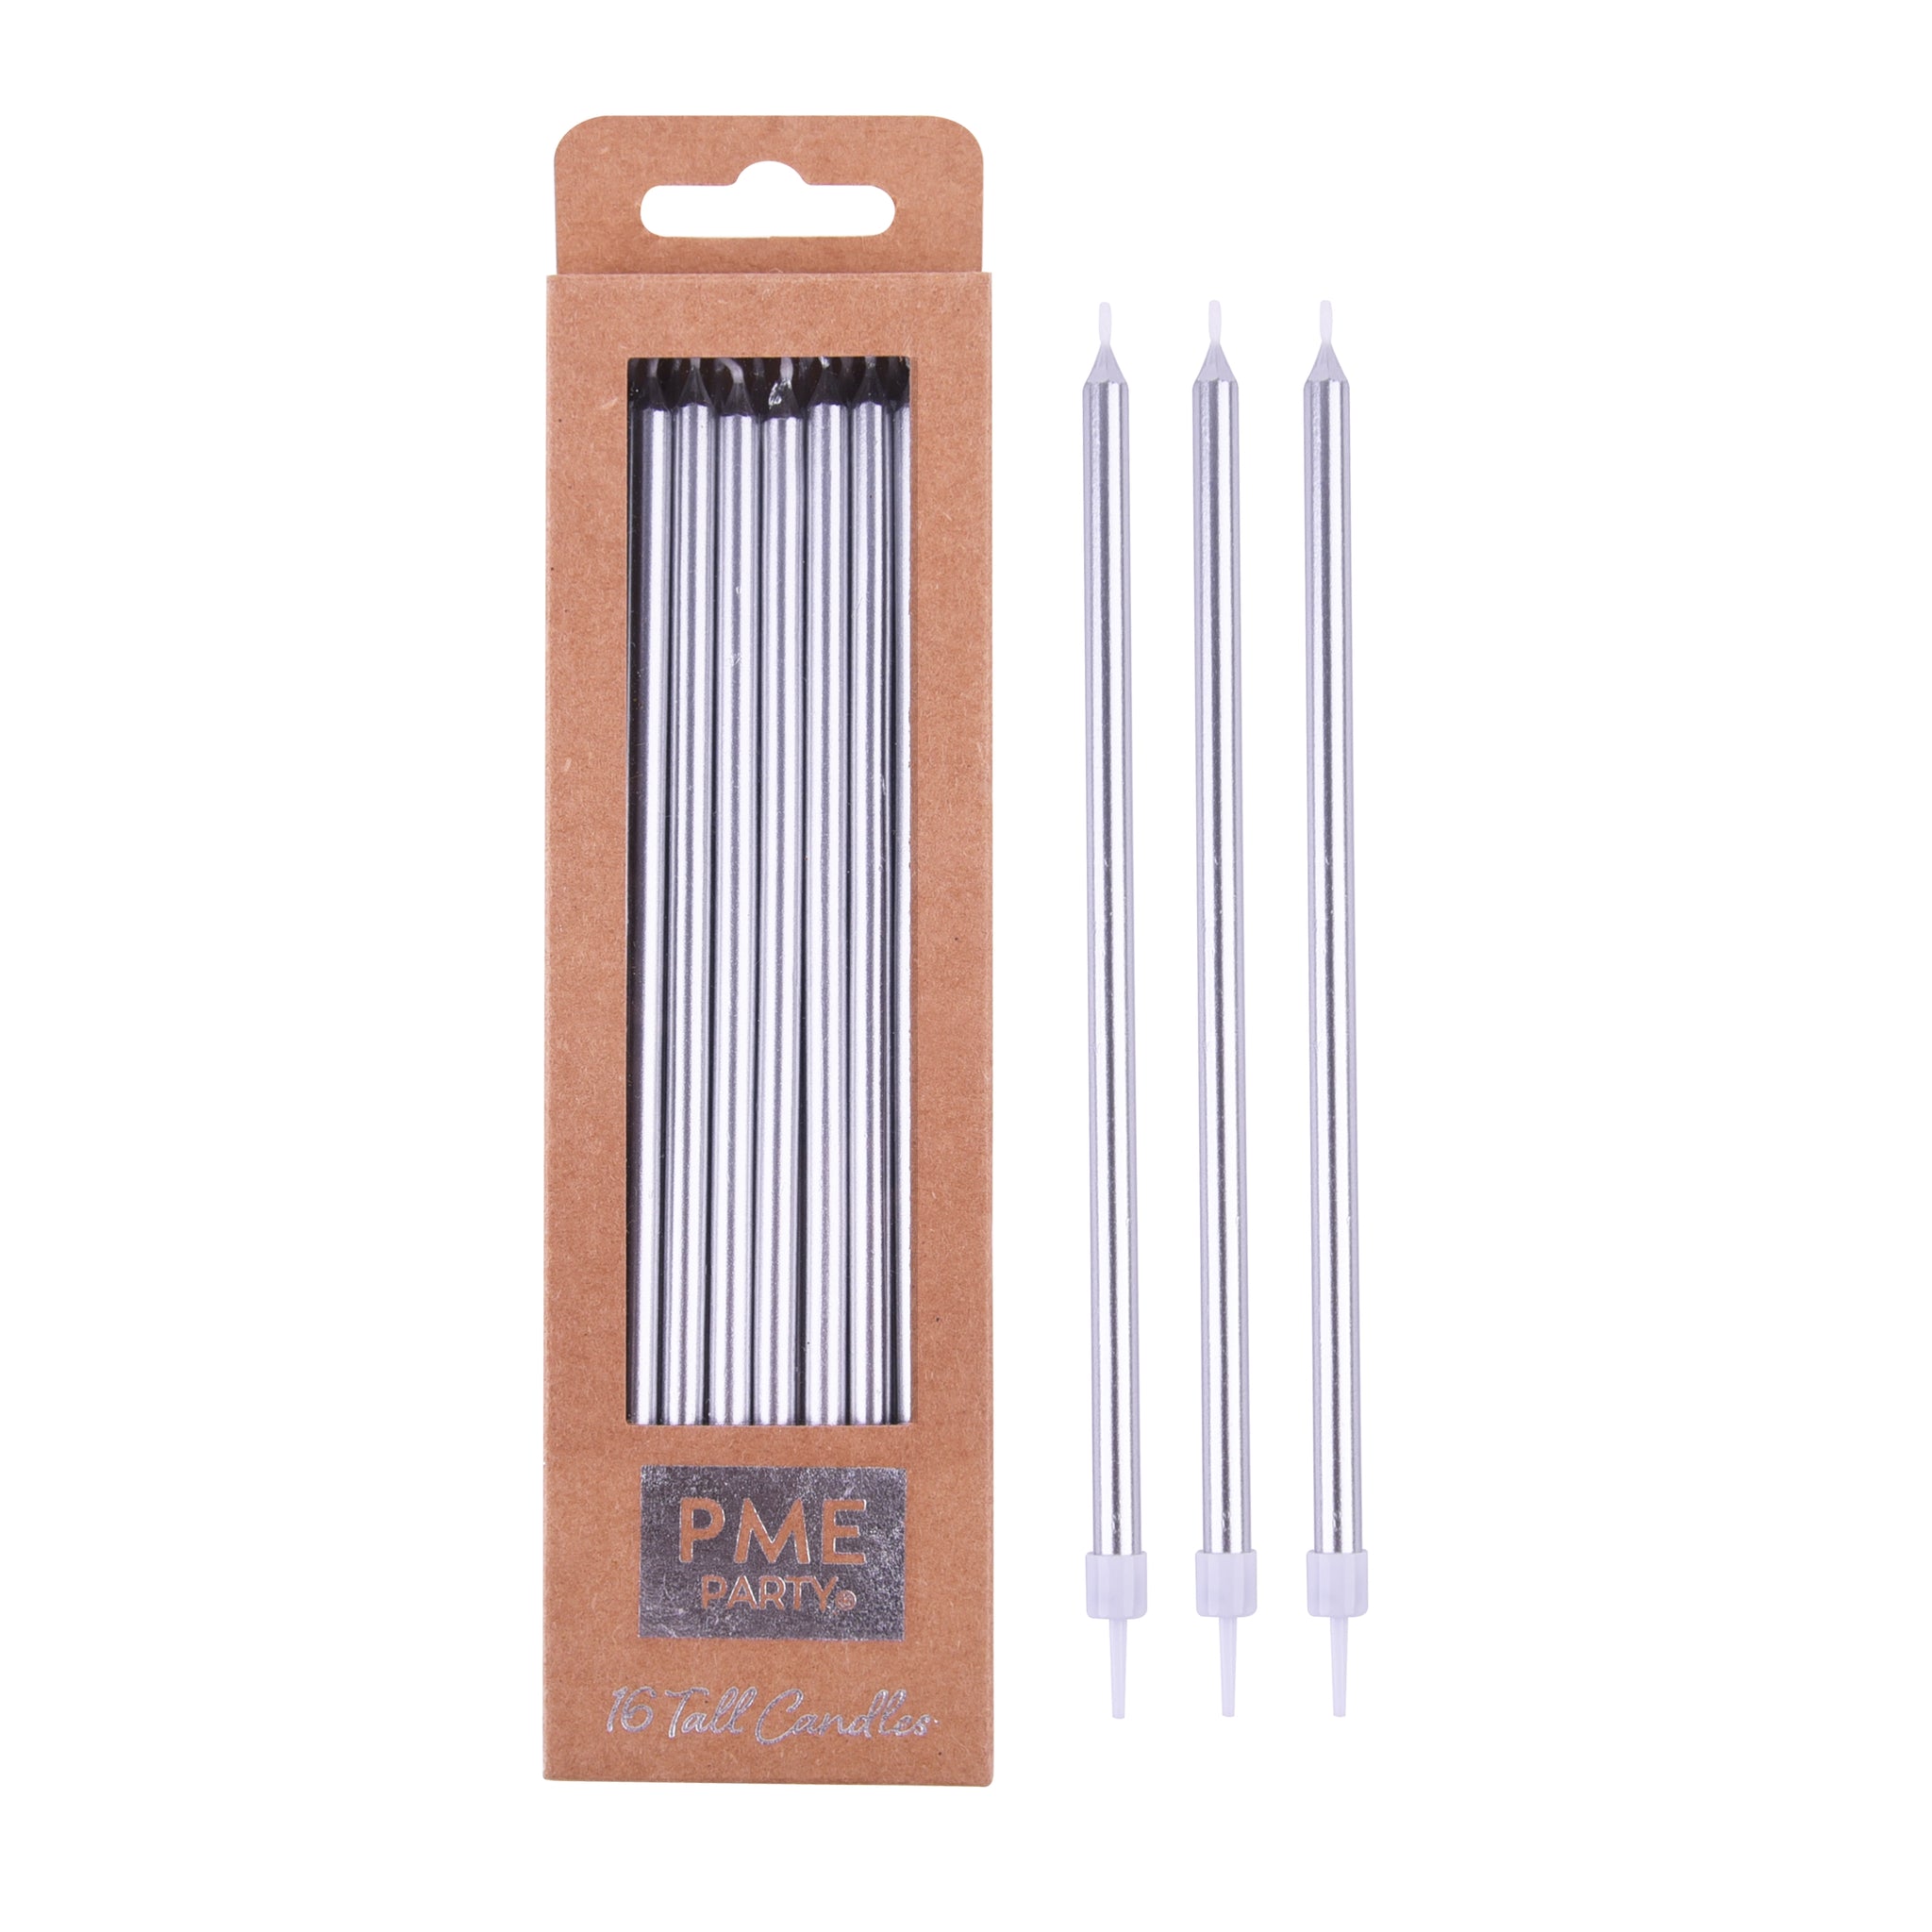 PME Extra Tall Candles 18cm 16pk